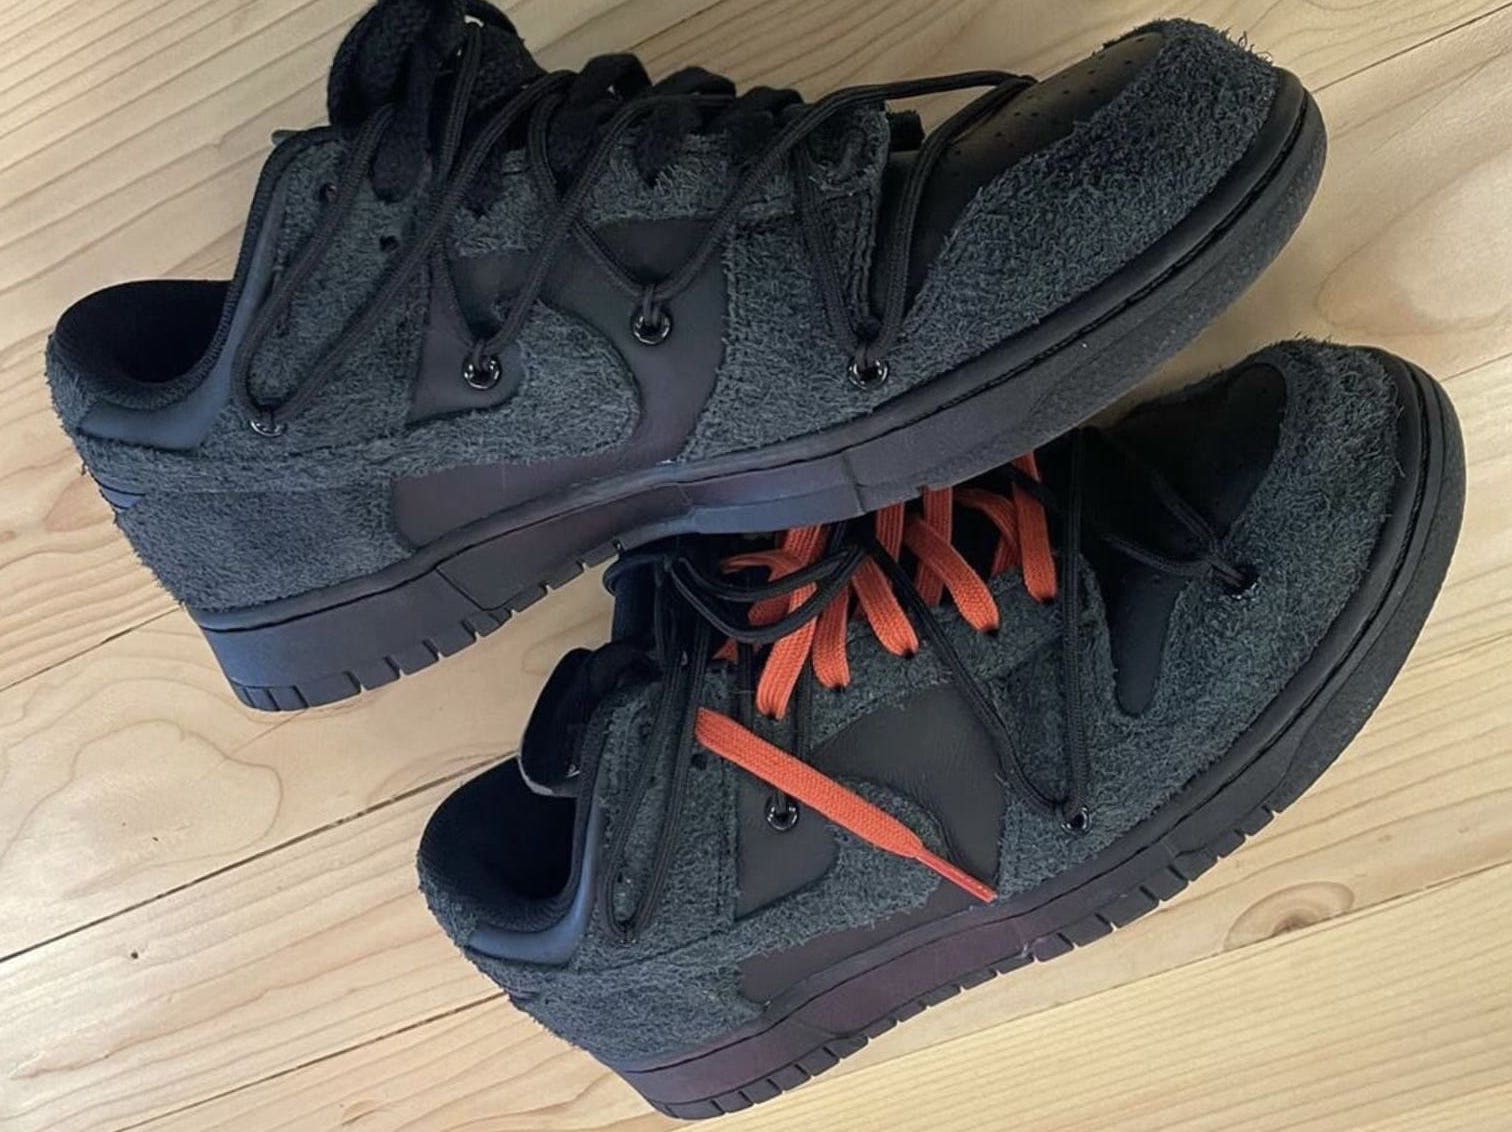 Third Off-White x Nike Dunk Low Colorway Surfaces